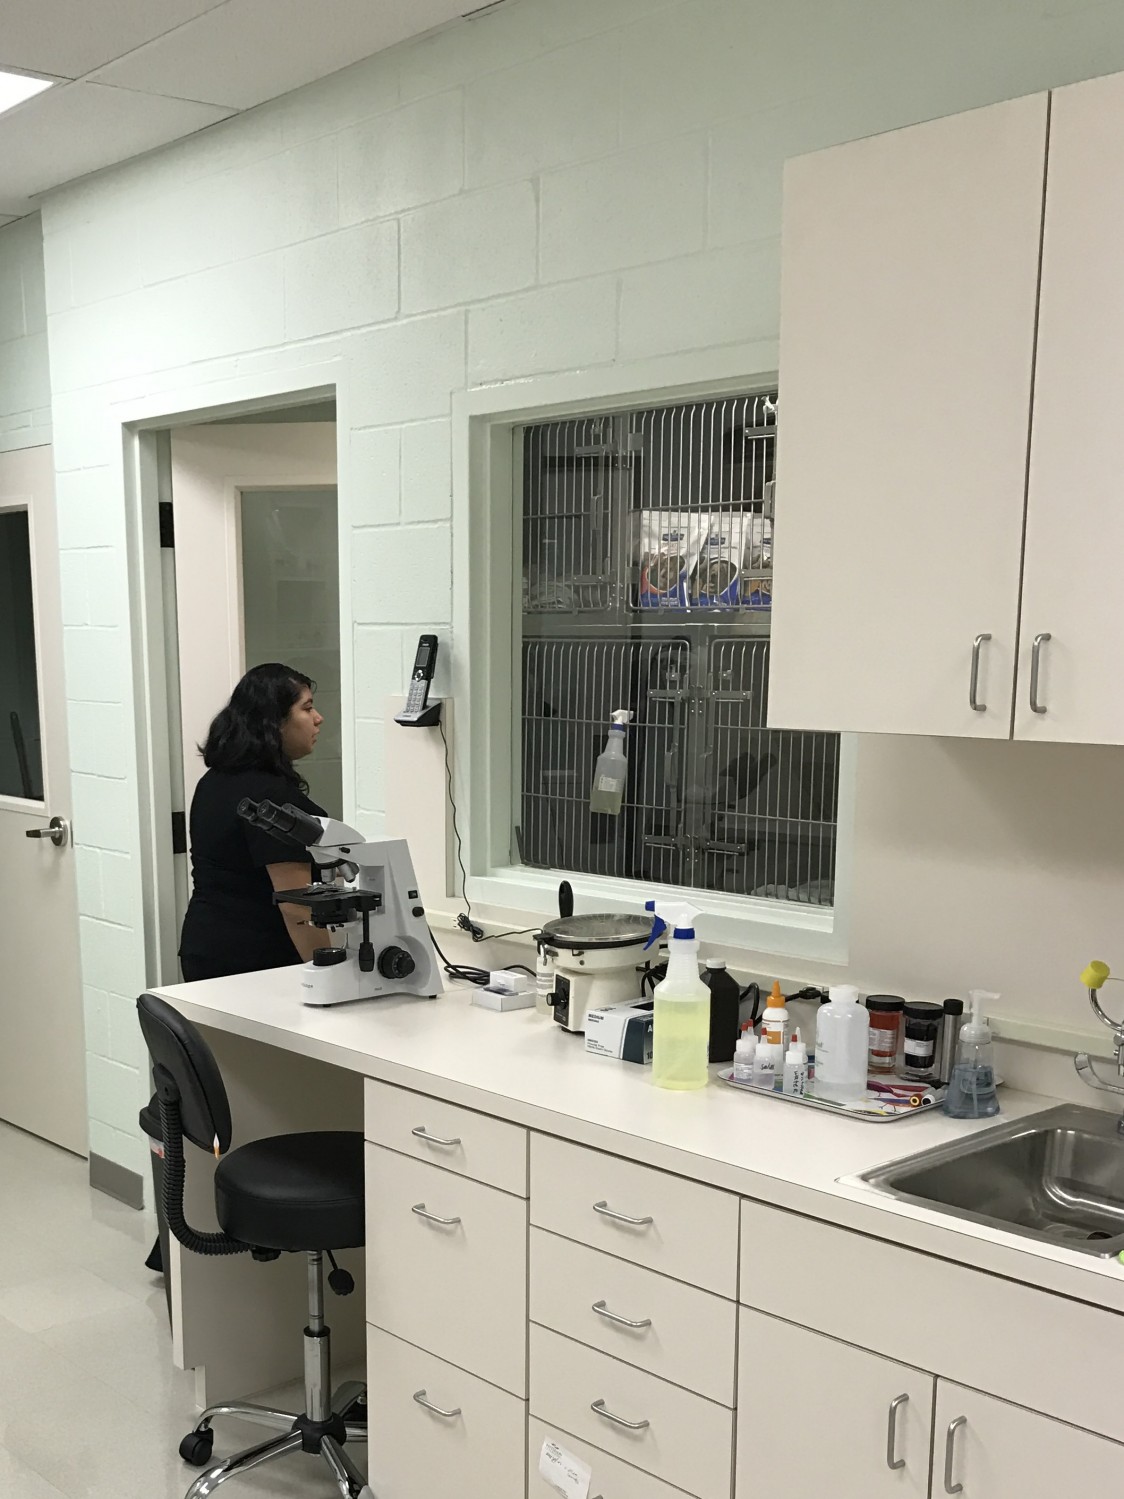 Kennels face main treatment area at Falcon Pass Animal Hospital in Clear Lake Houston